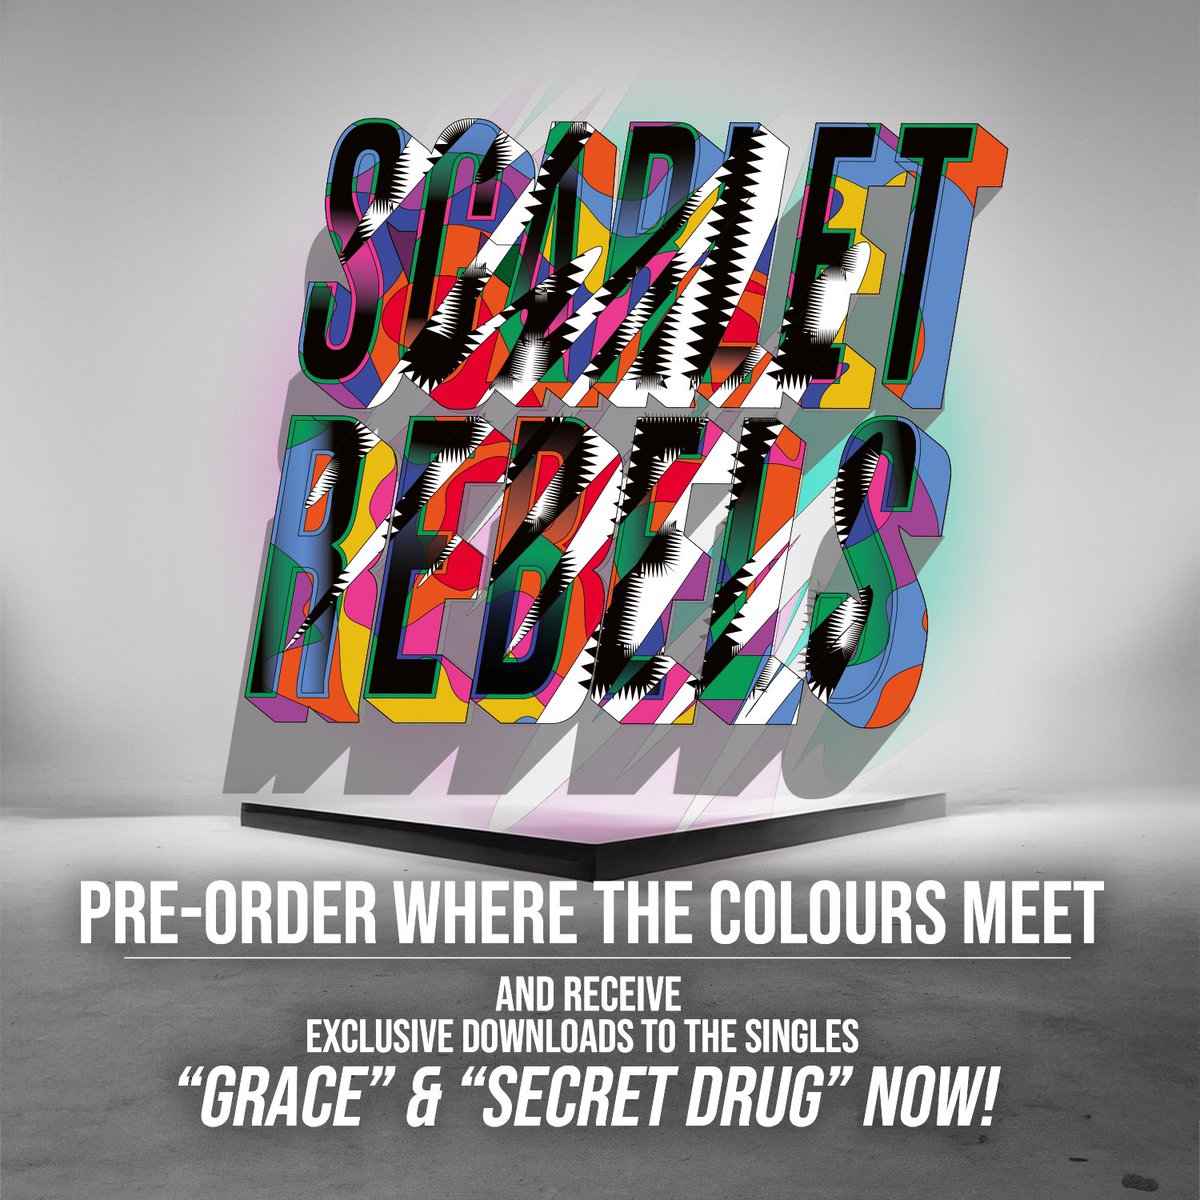 ‼️ Rebels! We have released ‘Grace’ from our brand new album ‘Where The Colours Meet’ If you pre order a copy with the download option, you can have both ‘Secret Drug’ and ‘Grace’ straight to your inboxes! What are you waiting for? Pre order 👇 earache.com/scarletrebels